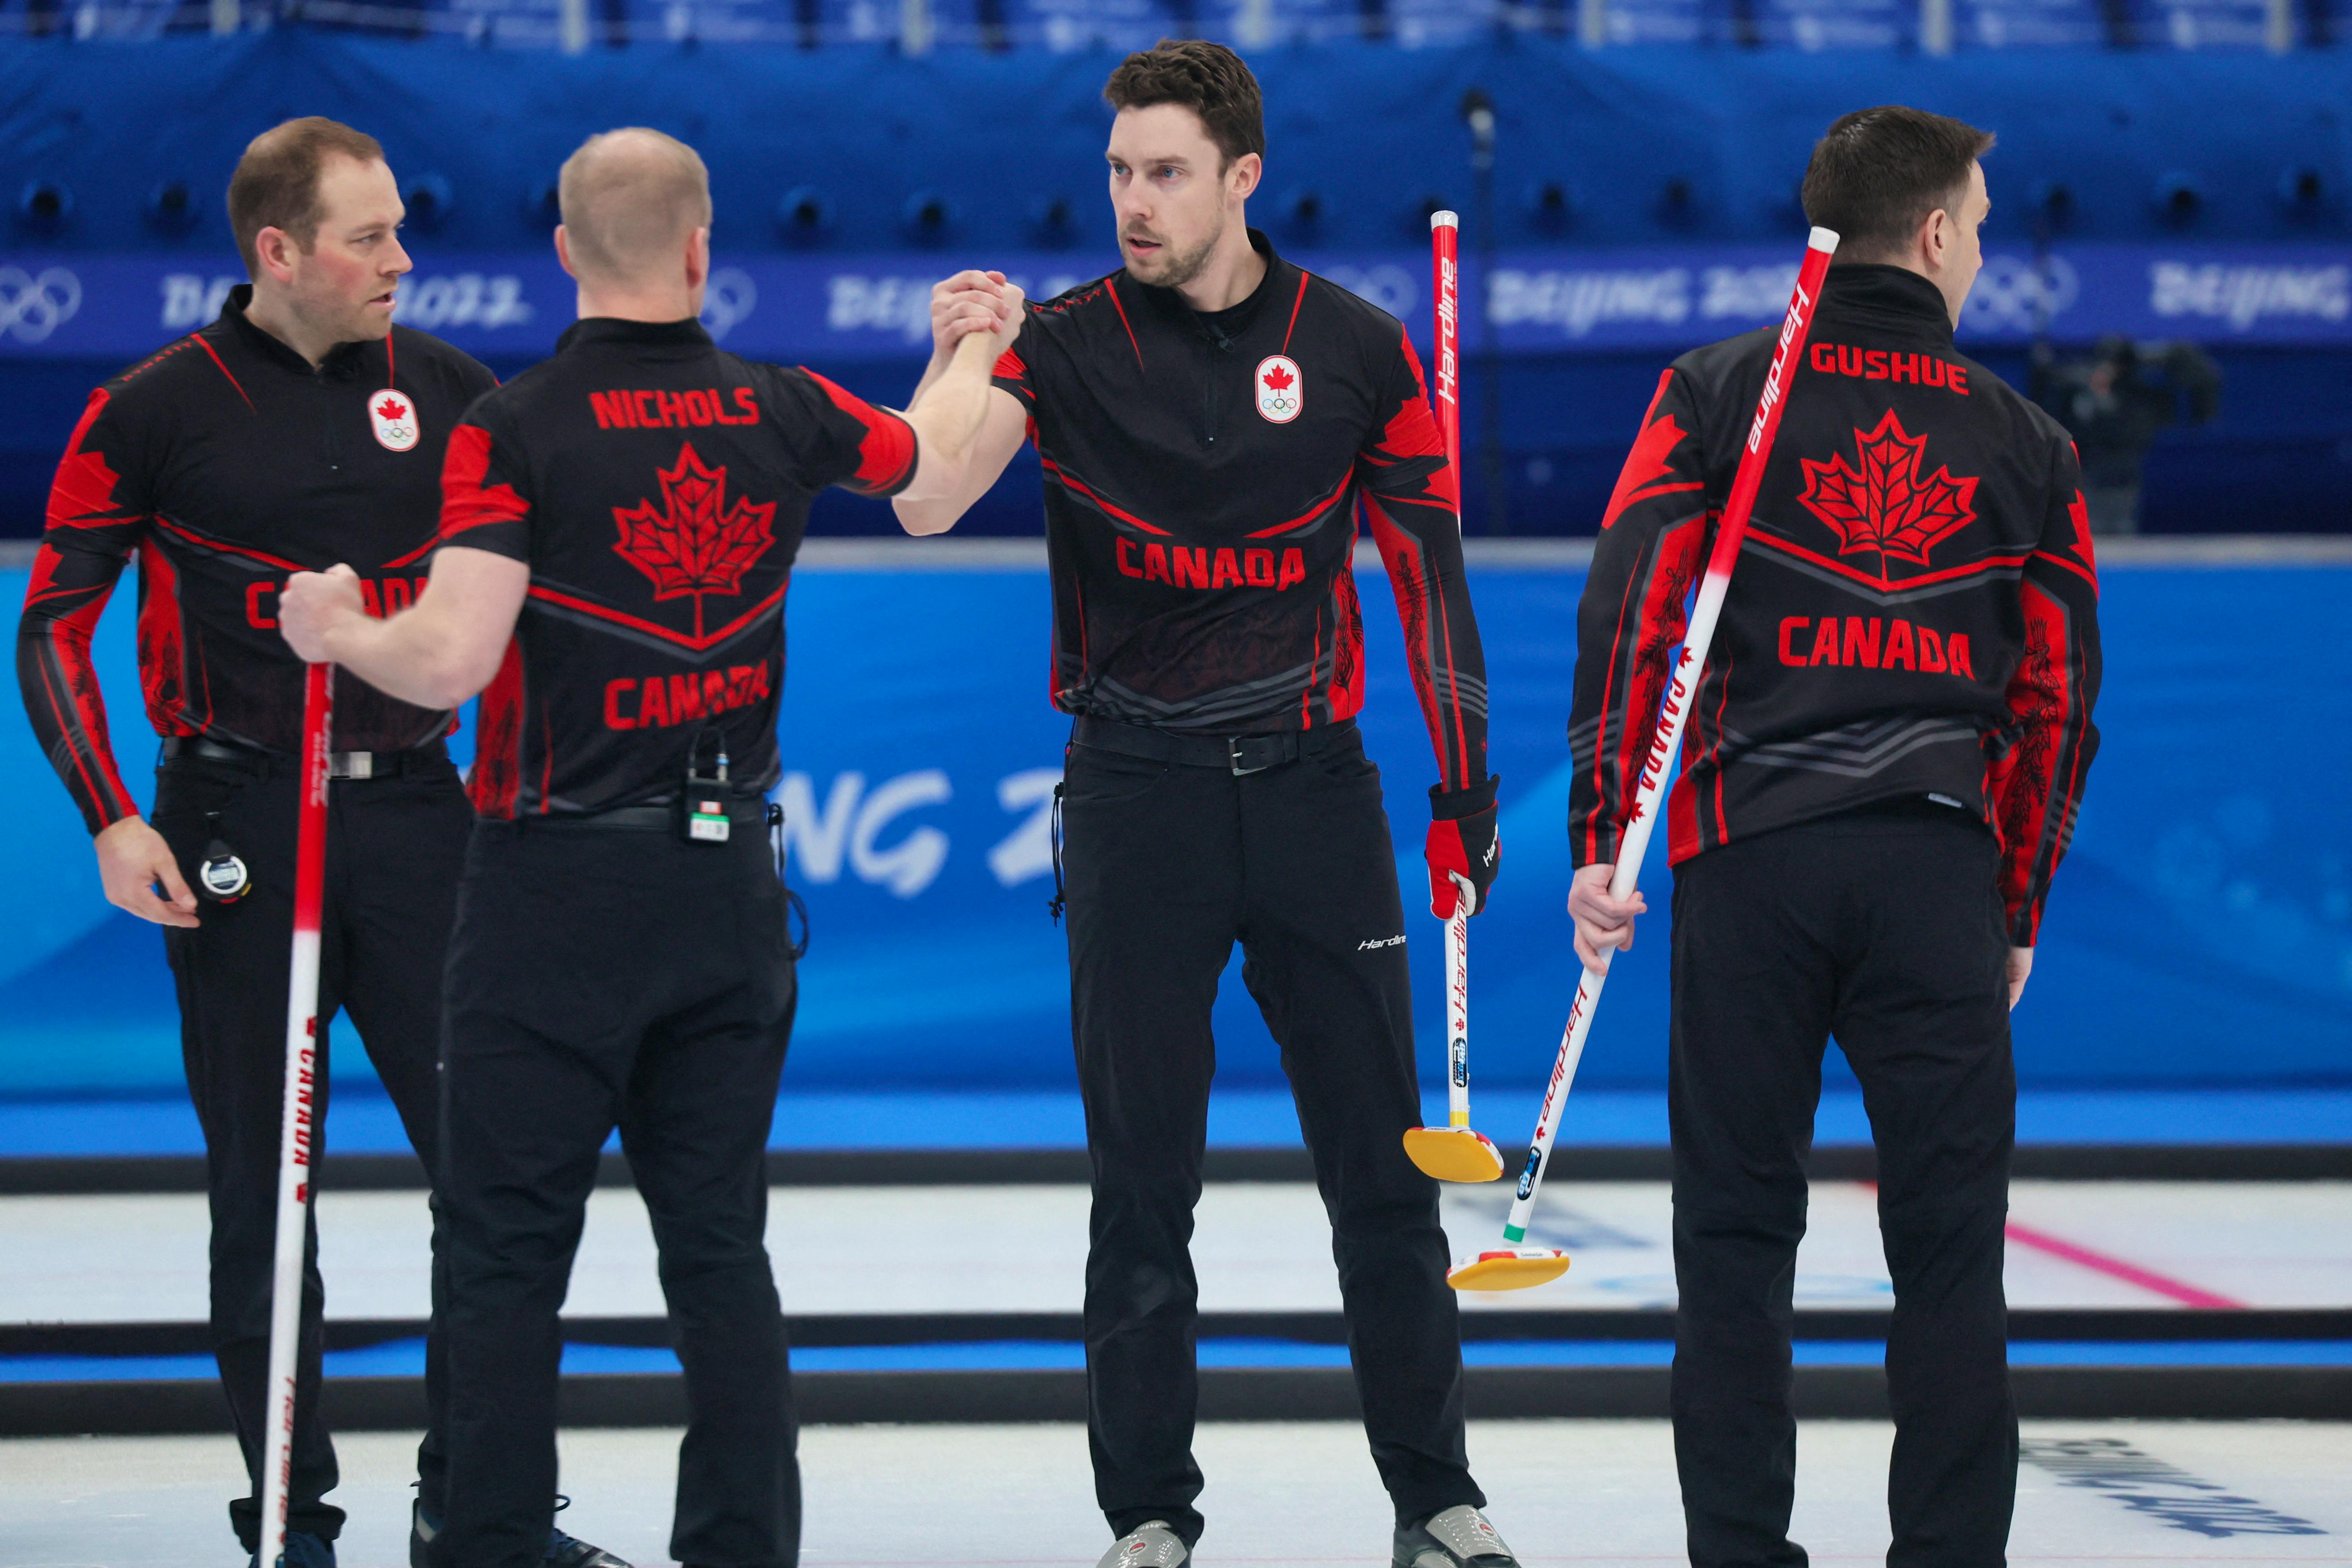 Brad Gushue's Team Canada qualifies for playoffs in Olympic men's